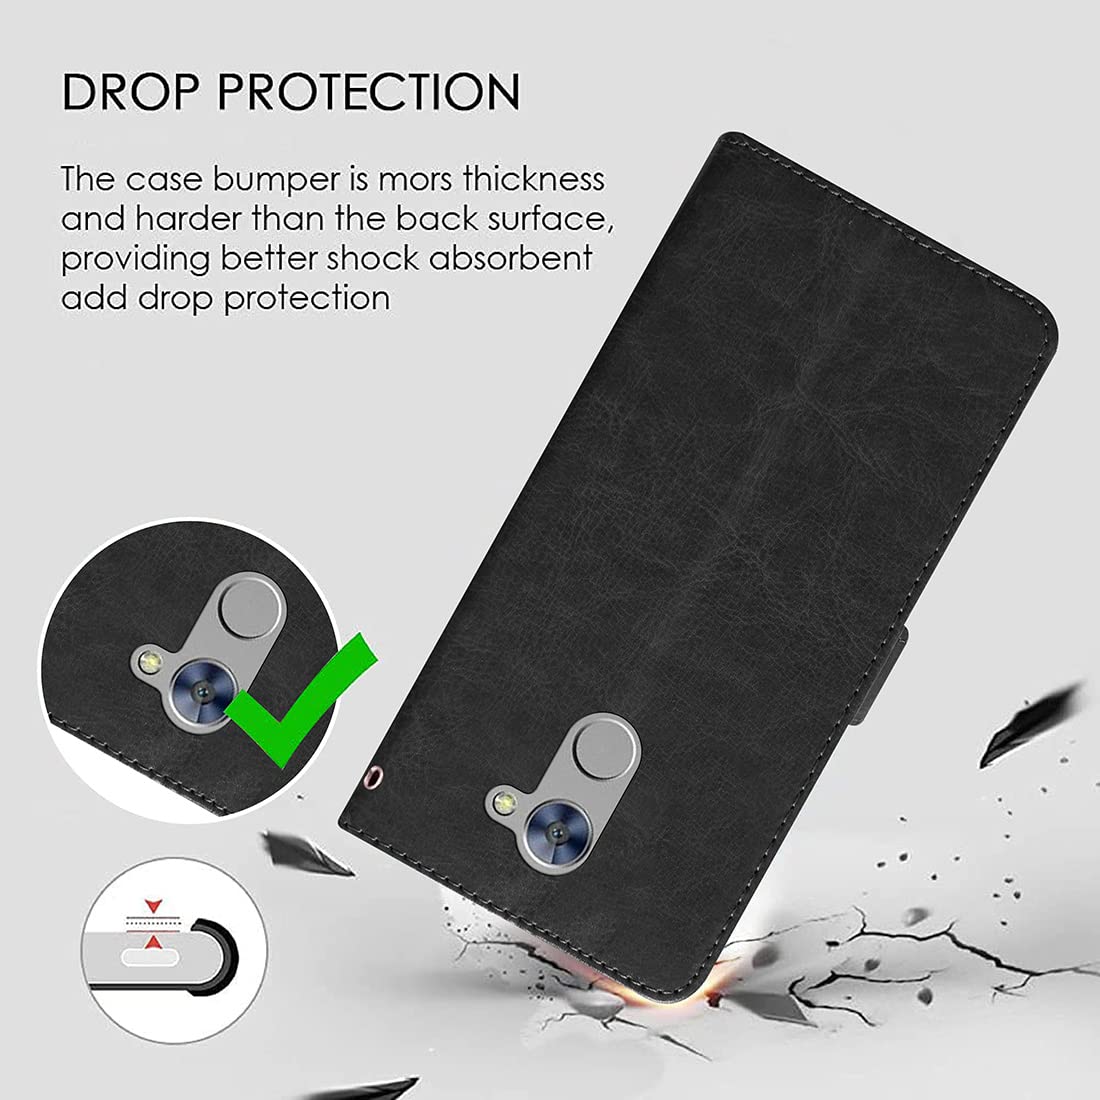 Premium Wallet Flip Cover for Huawei Honor Holly 4 Plus